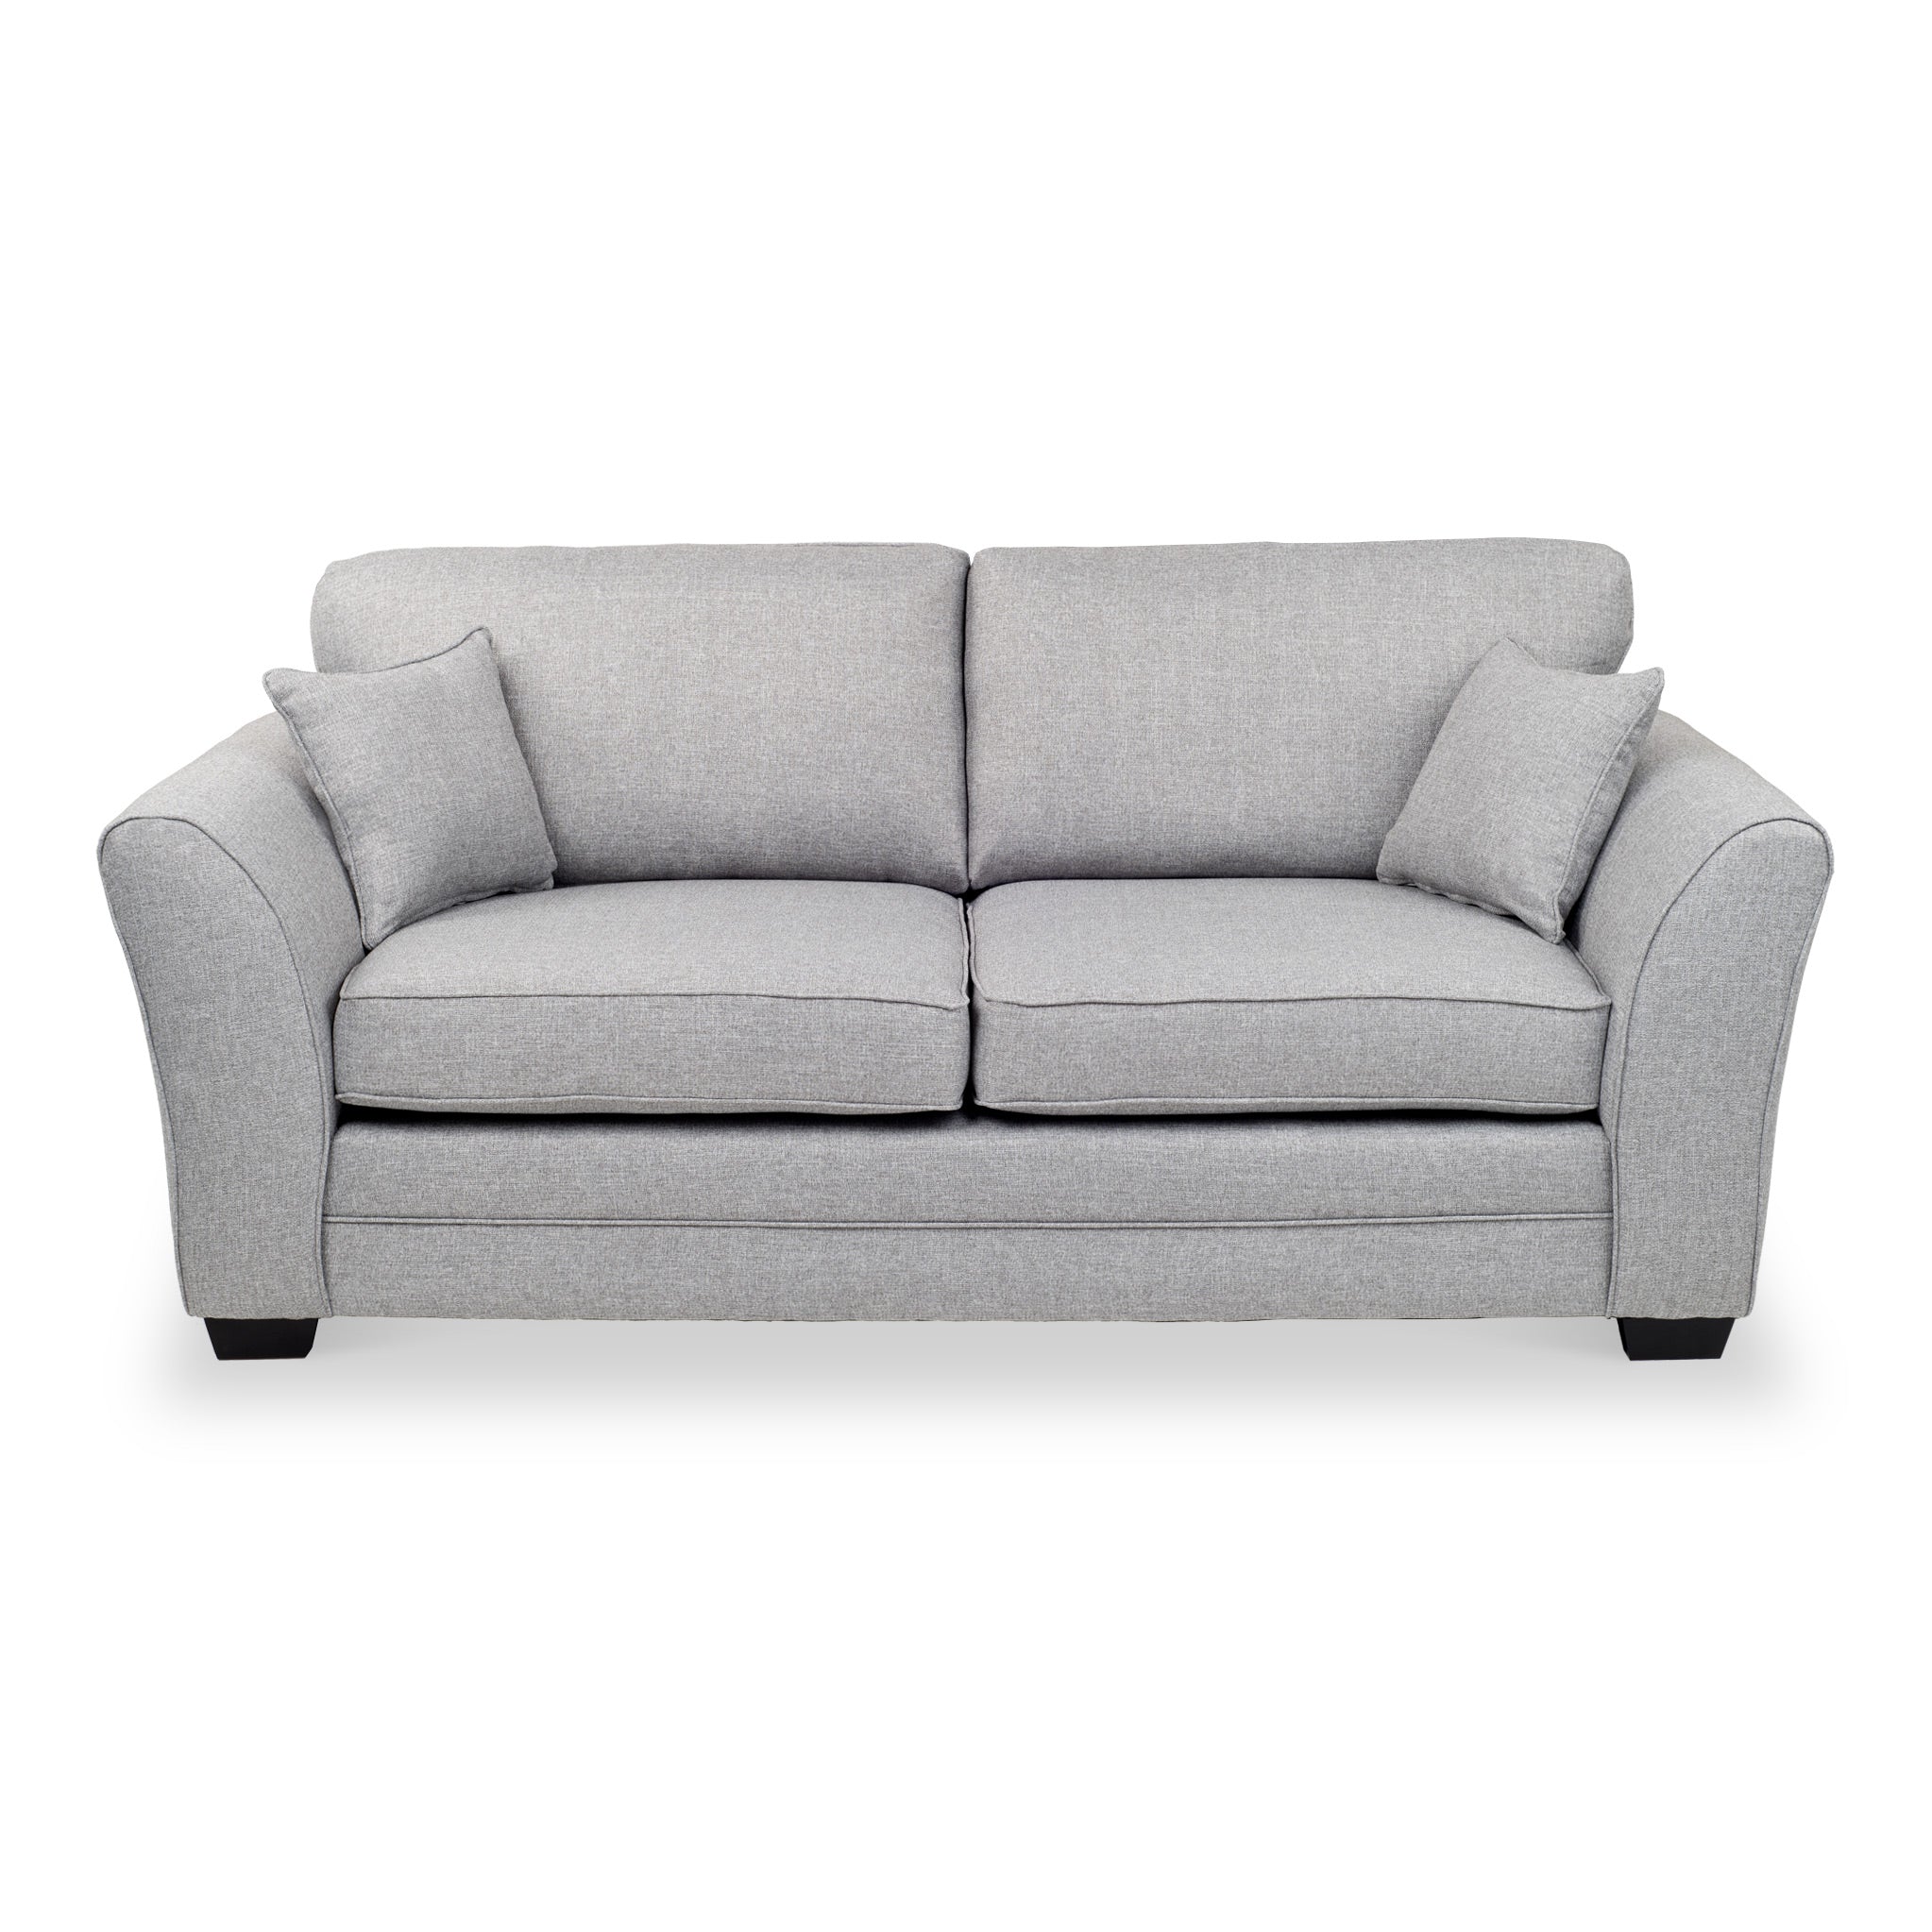 St Ives 3 Seater Sofa Silver Charcoal Blue Fabric Couch Roseland